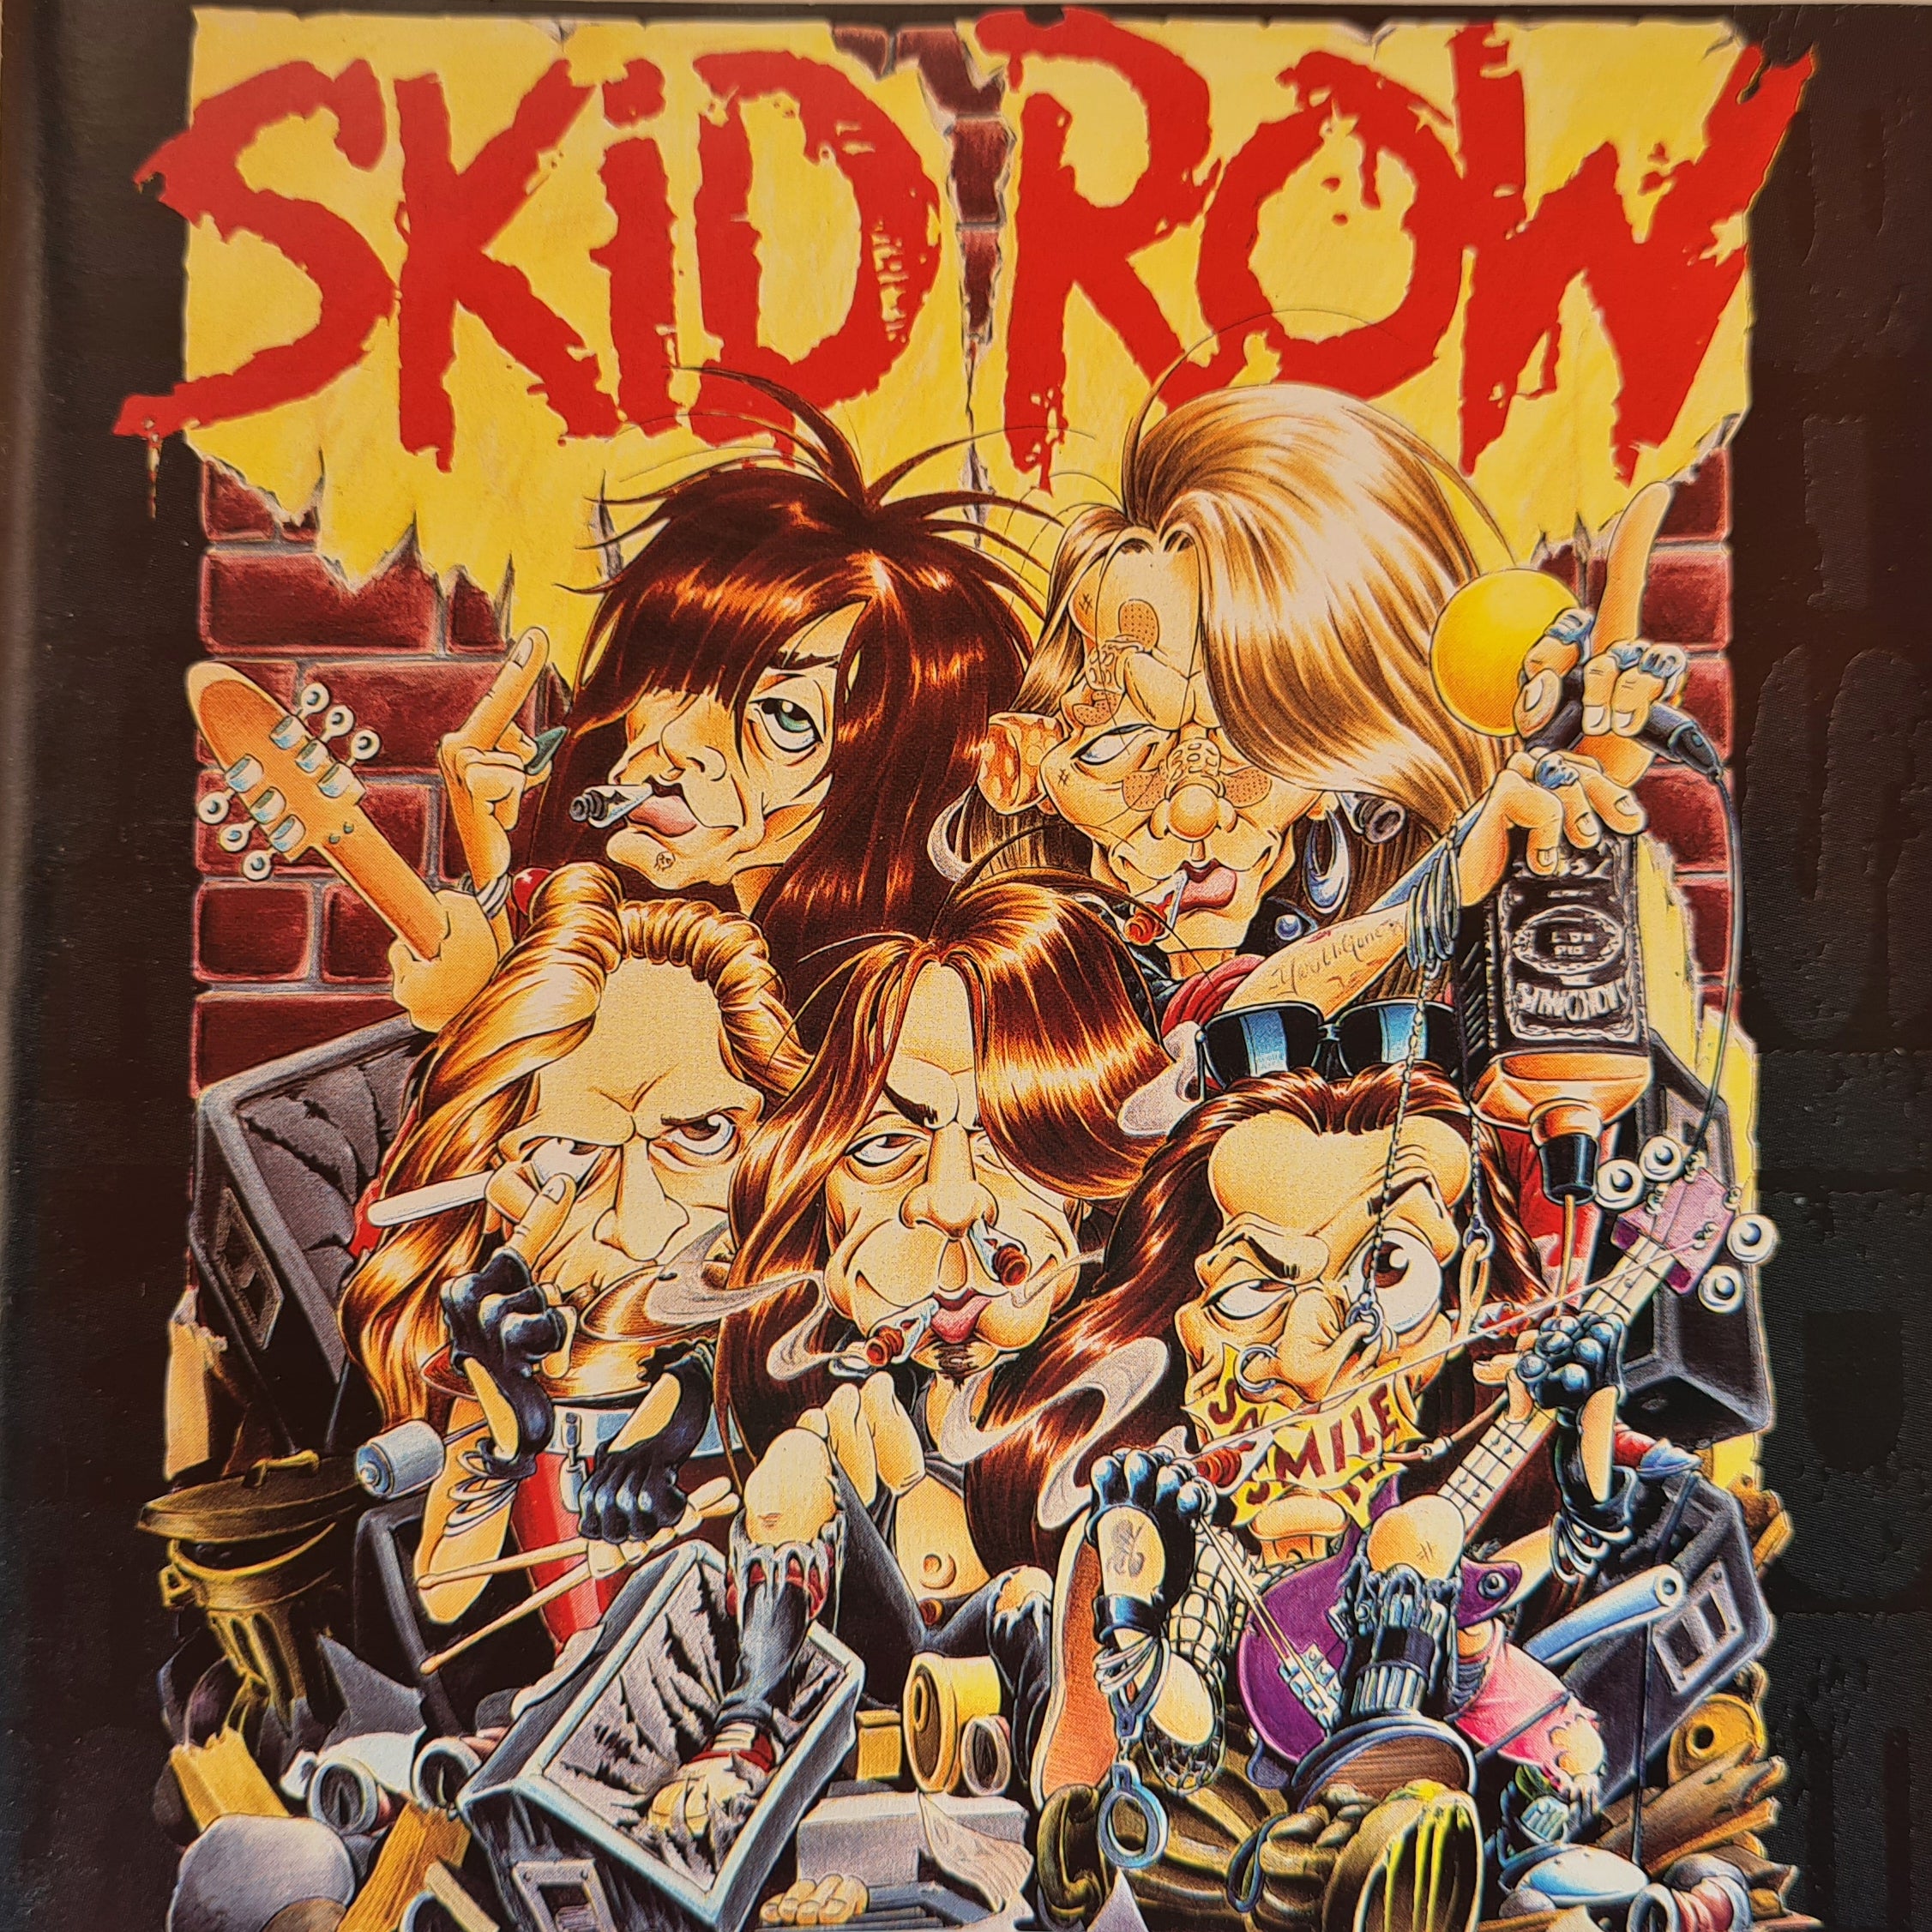 Skid Row – B-Side Ourselves (CD)